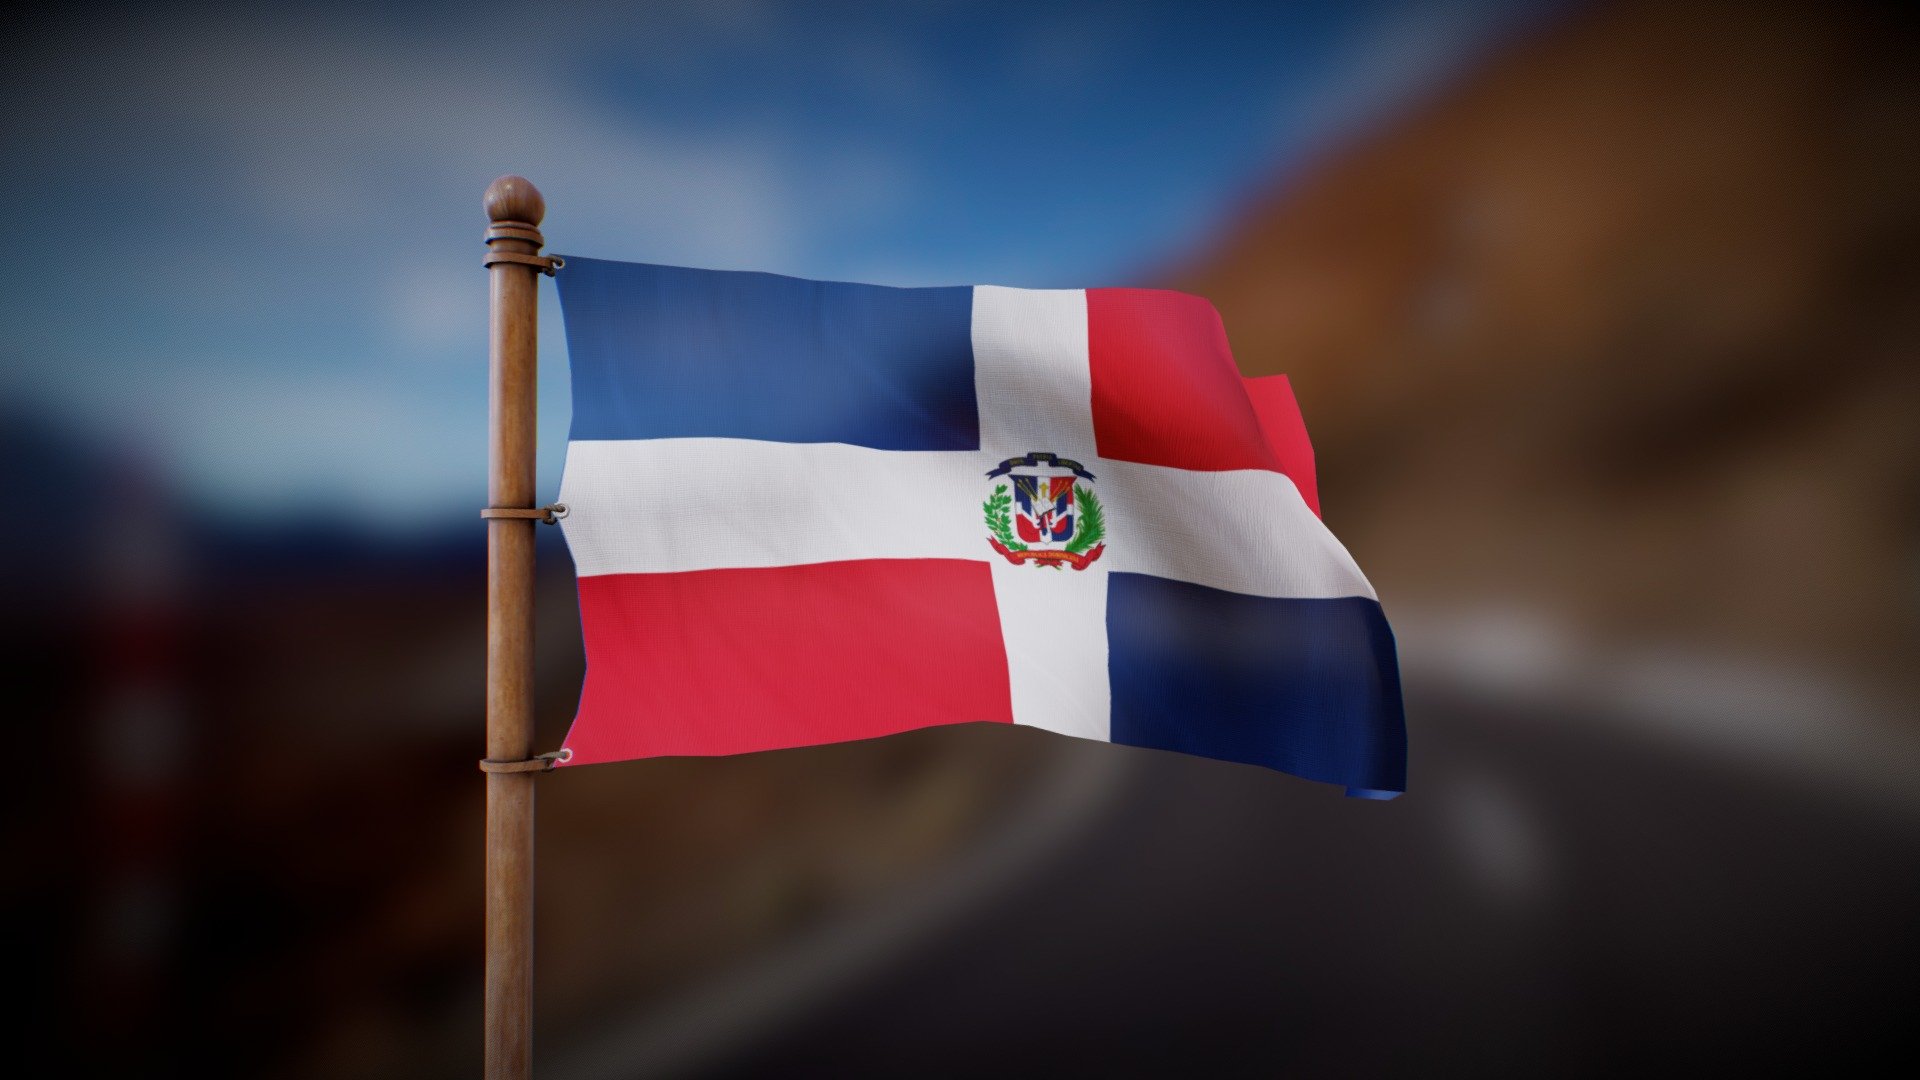 Flag waving in the wind in a looped animation

Joint Animation, perfect for any purpose
4K PBR textures

Feel free to DM me for anu question of custom requests :) - Flag of Dominican Republic - Wind Animated Loop - Buy Royalty Free 3D model by Deftroy 3d model